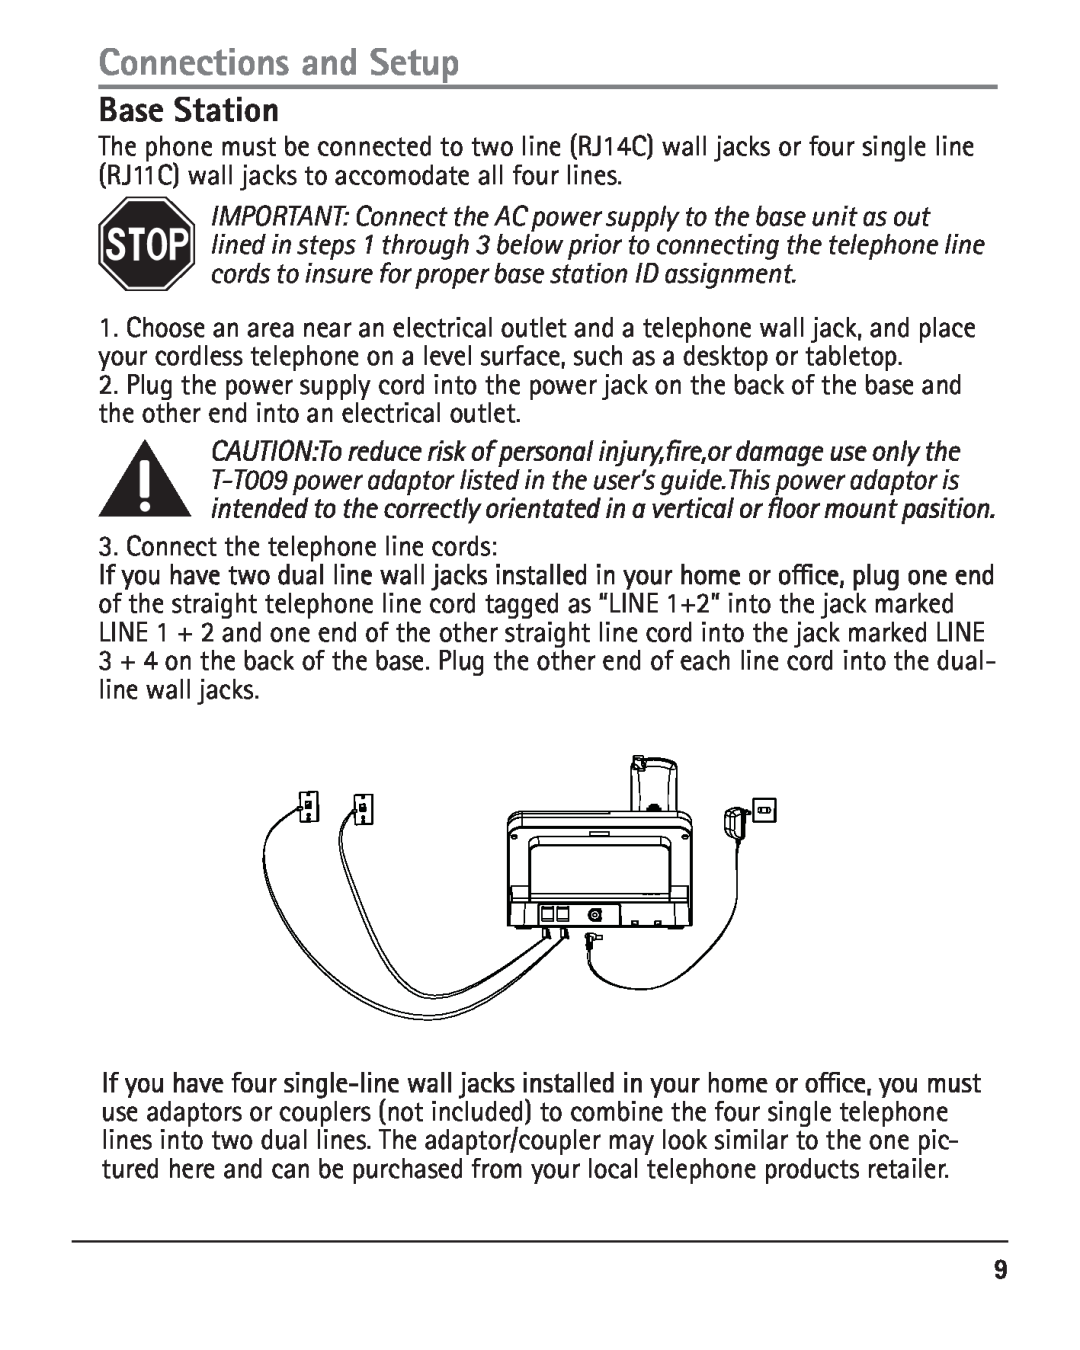 RCA 25420 manual Base Station, Connections and Setup 